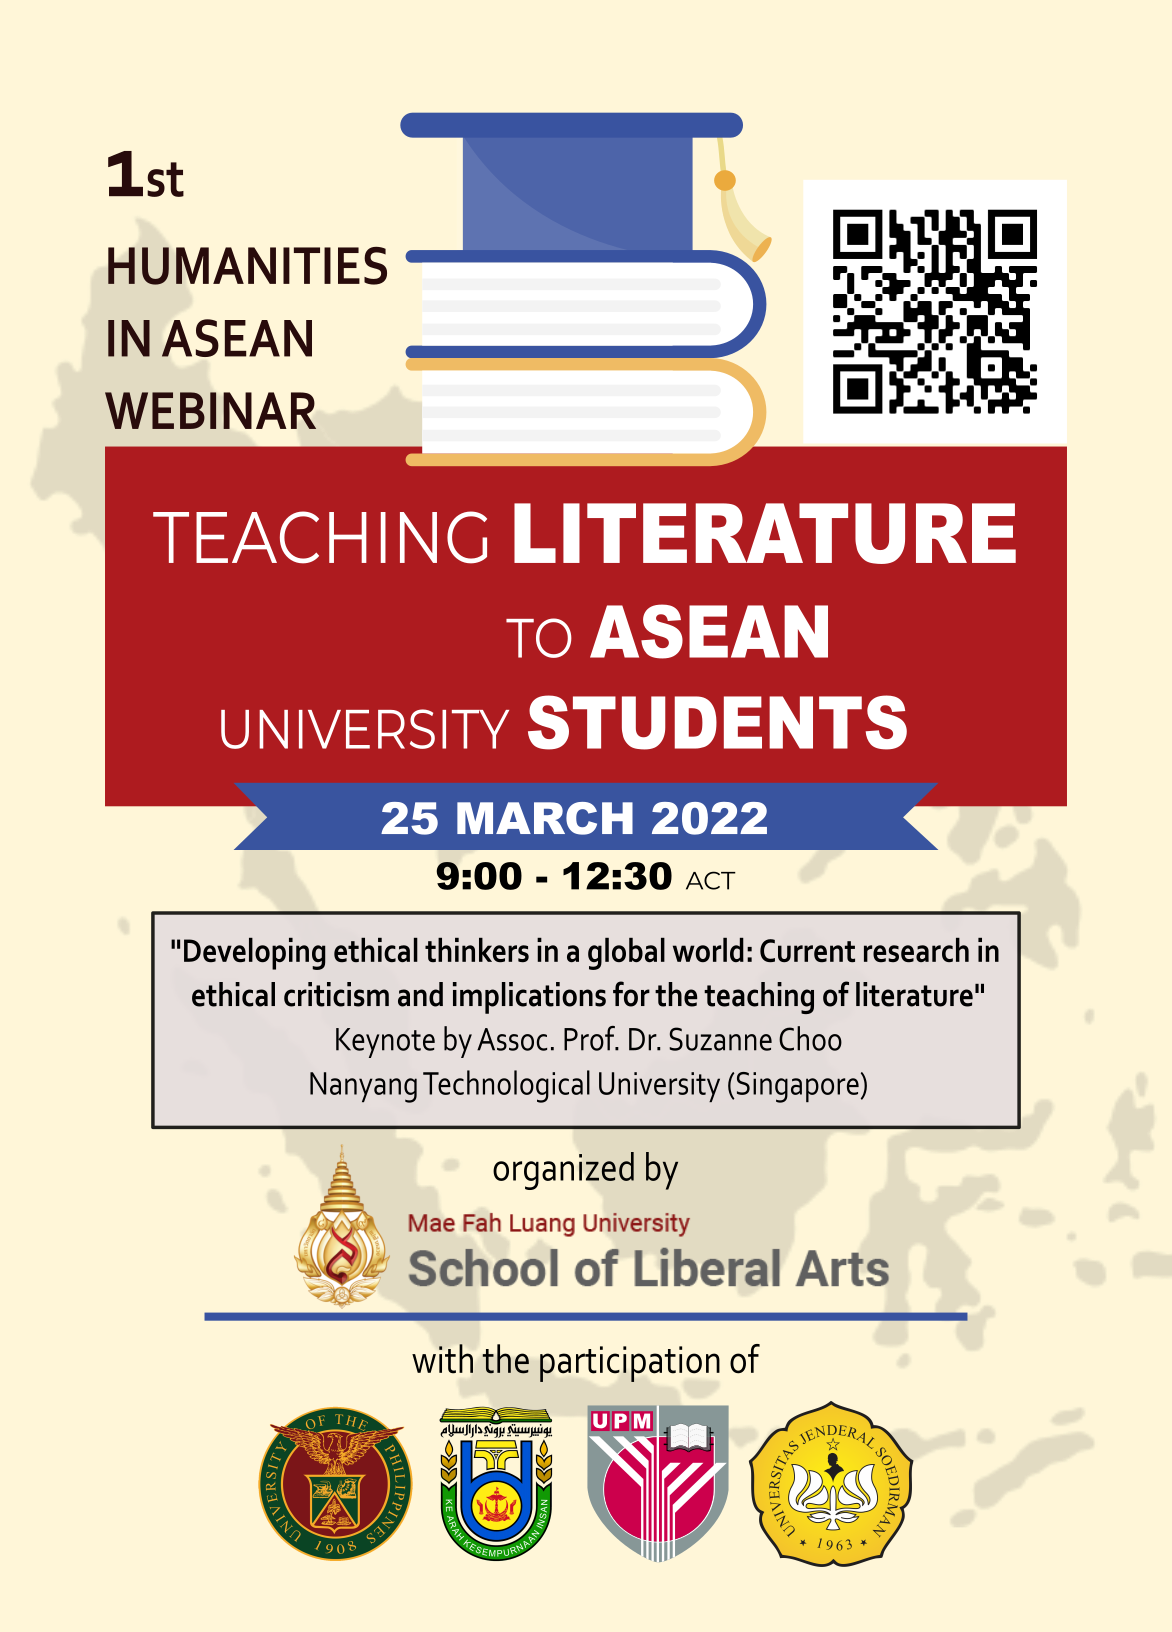 School of Liberal Arts invited to join webinar : Teaching literature to ASEAN university students